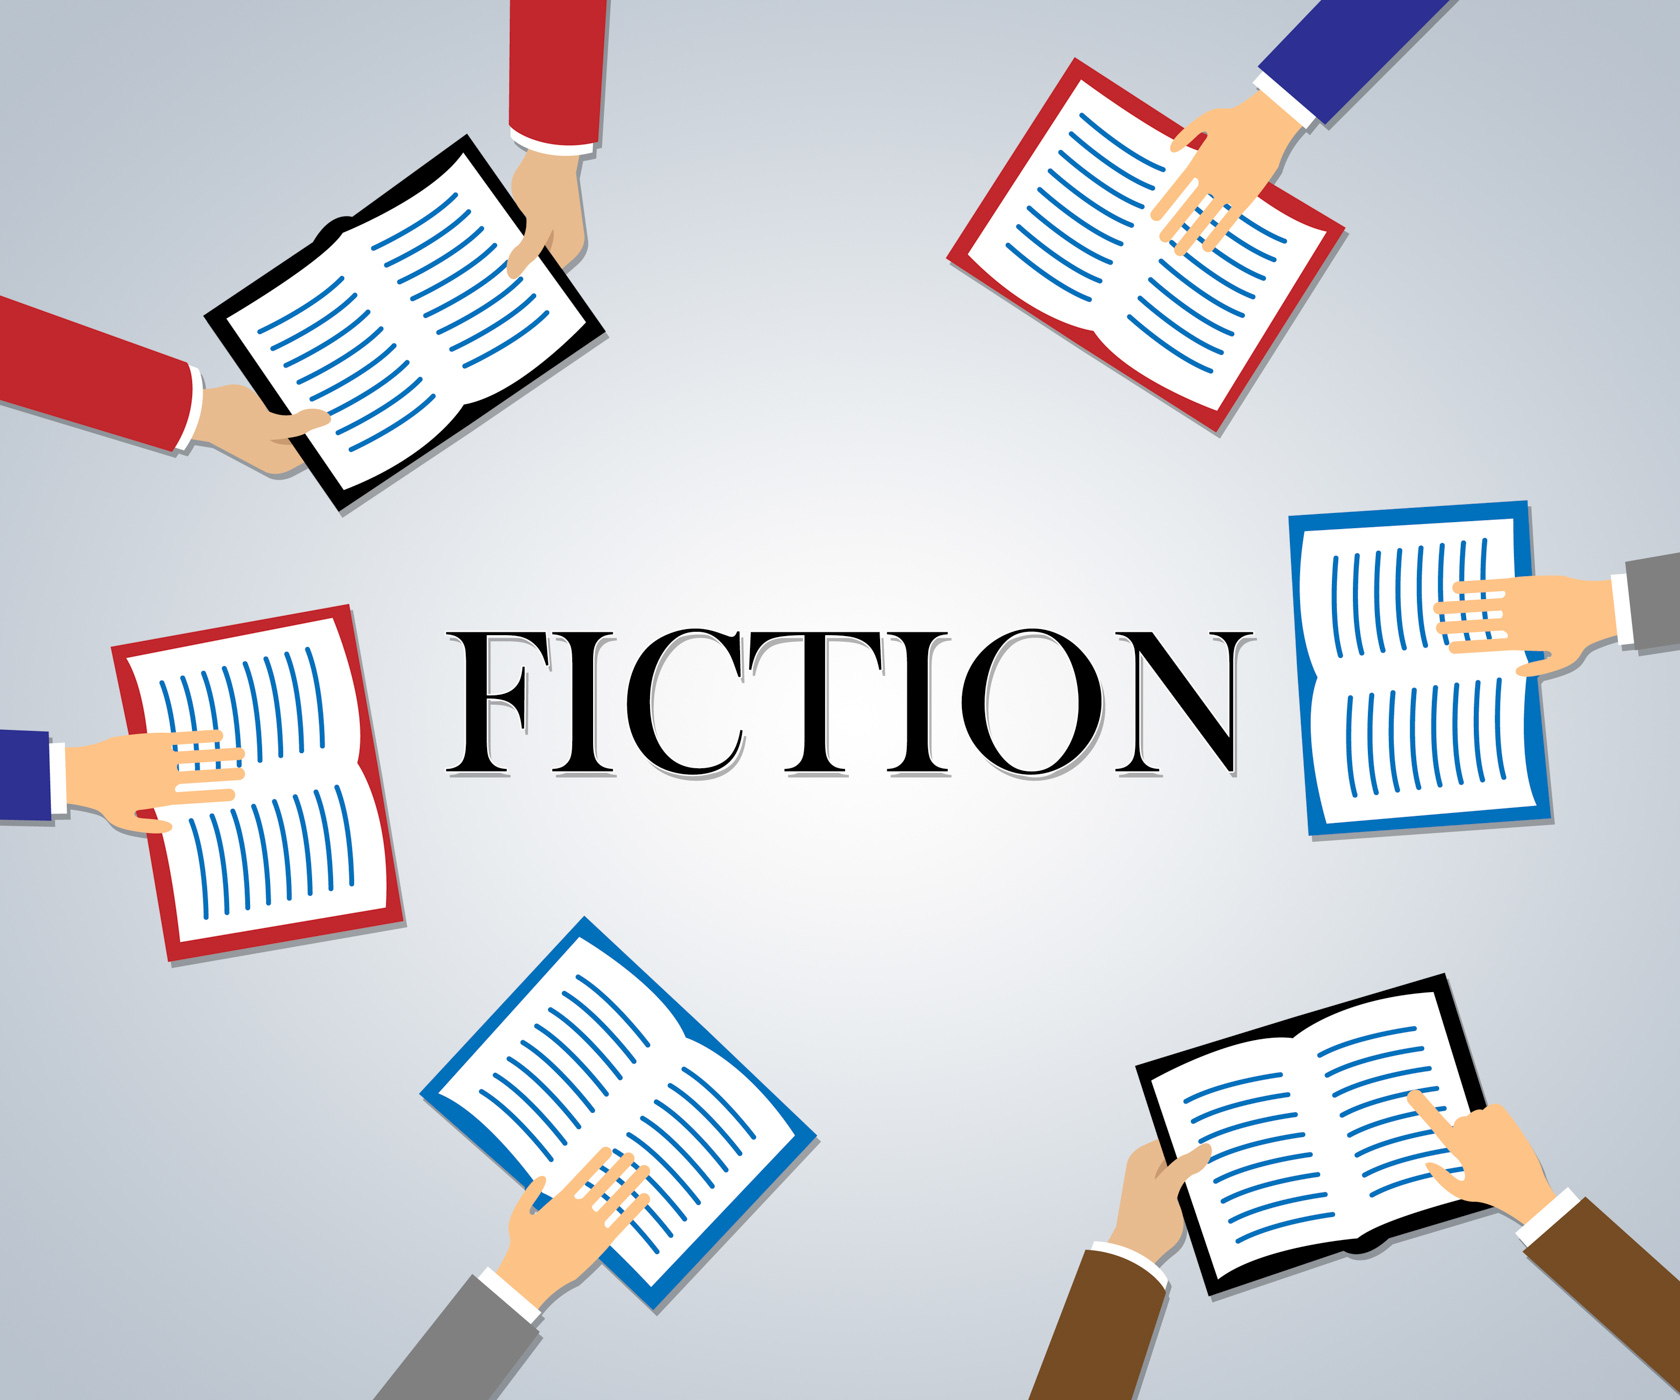 Fiction books represents creative writing and education photo